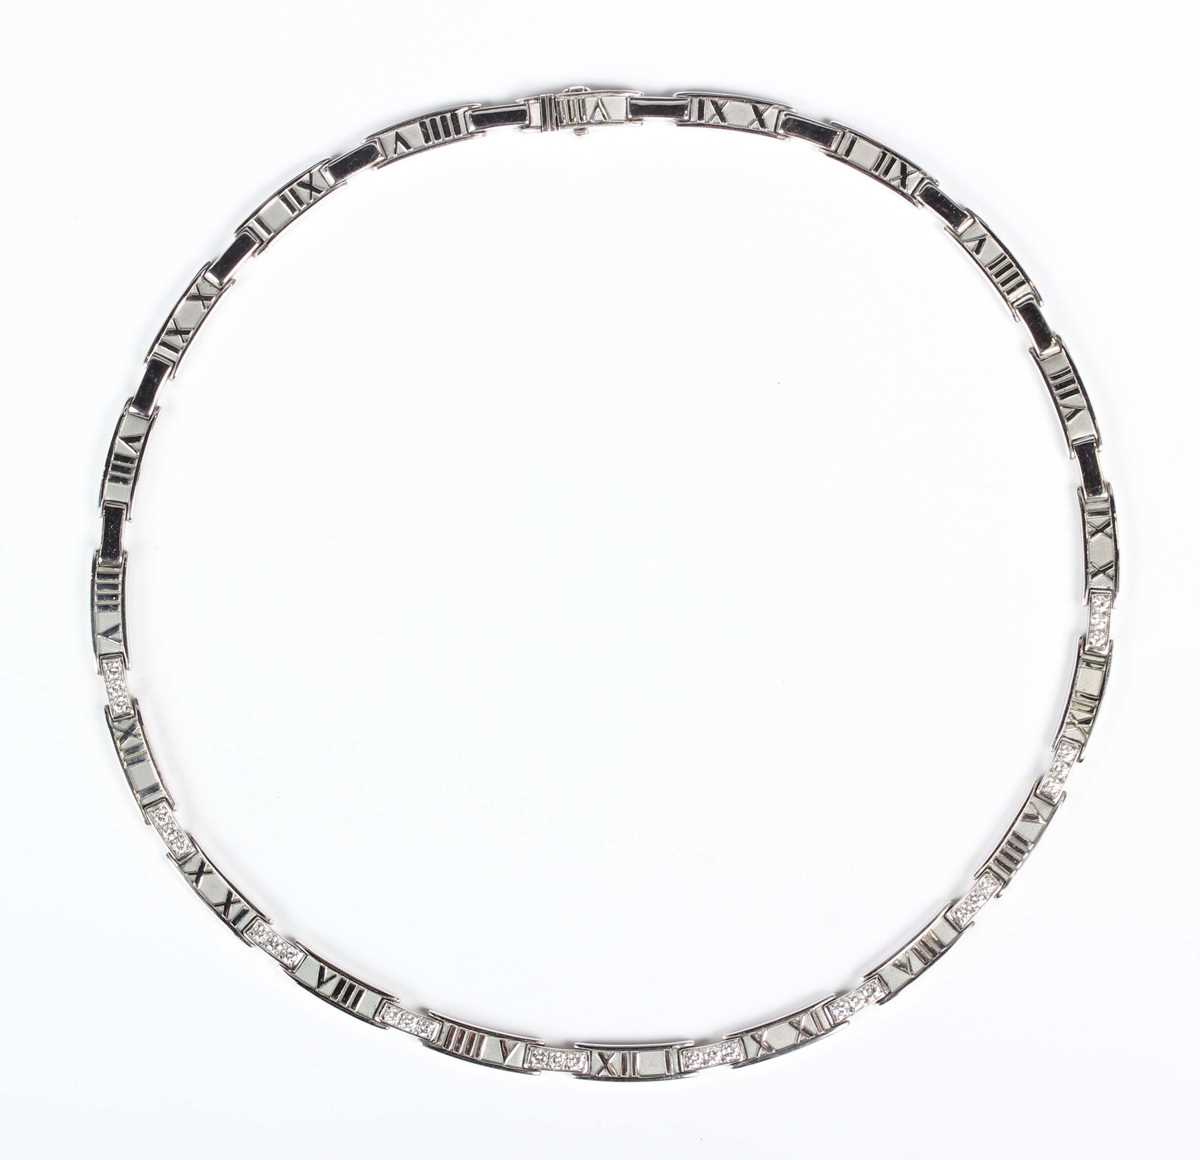 A Tiffany & Co 18ct white gold and diamond Atlas collar necklace, detailed ‘Tiffany & Co 1995 750